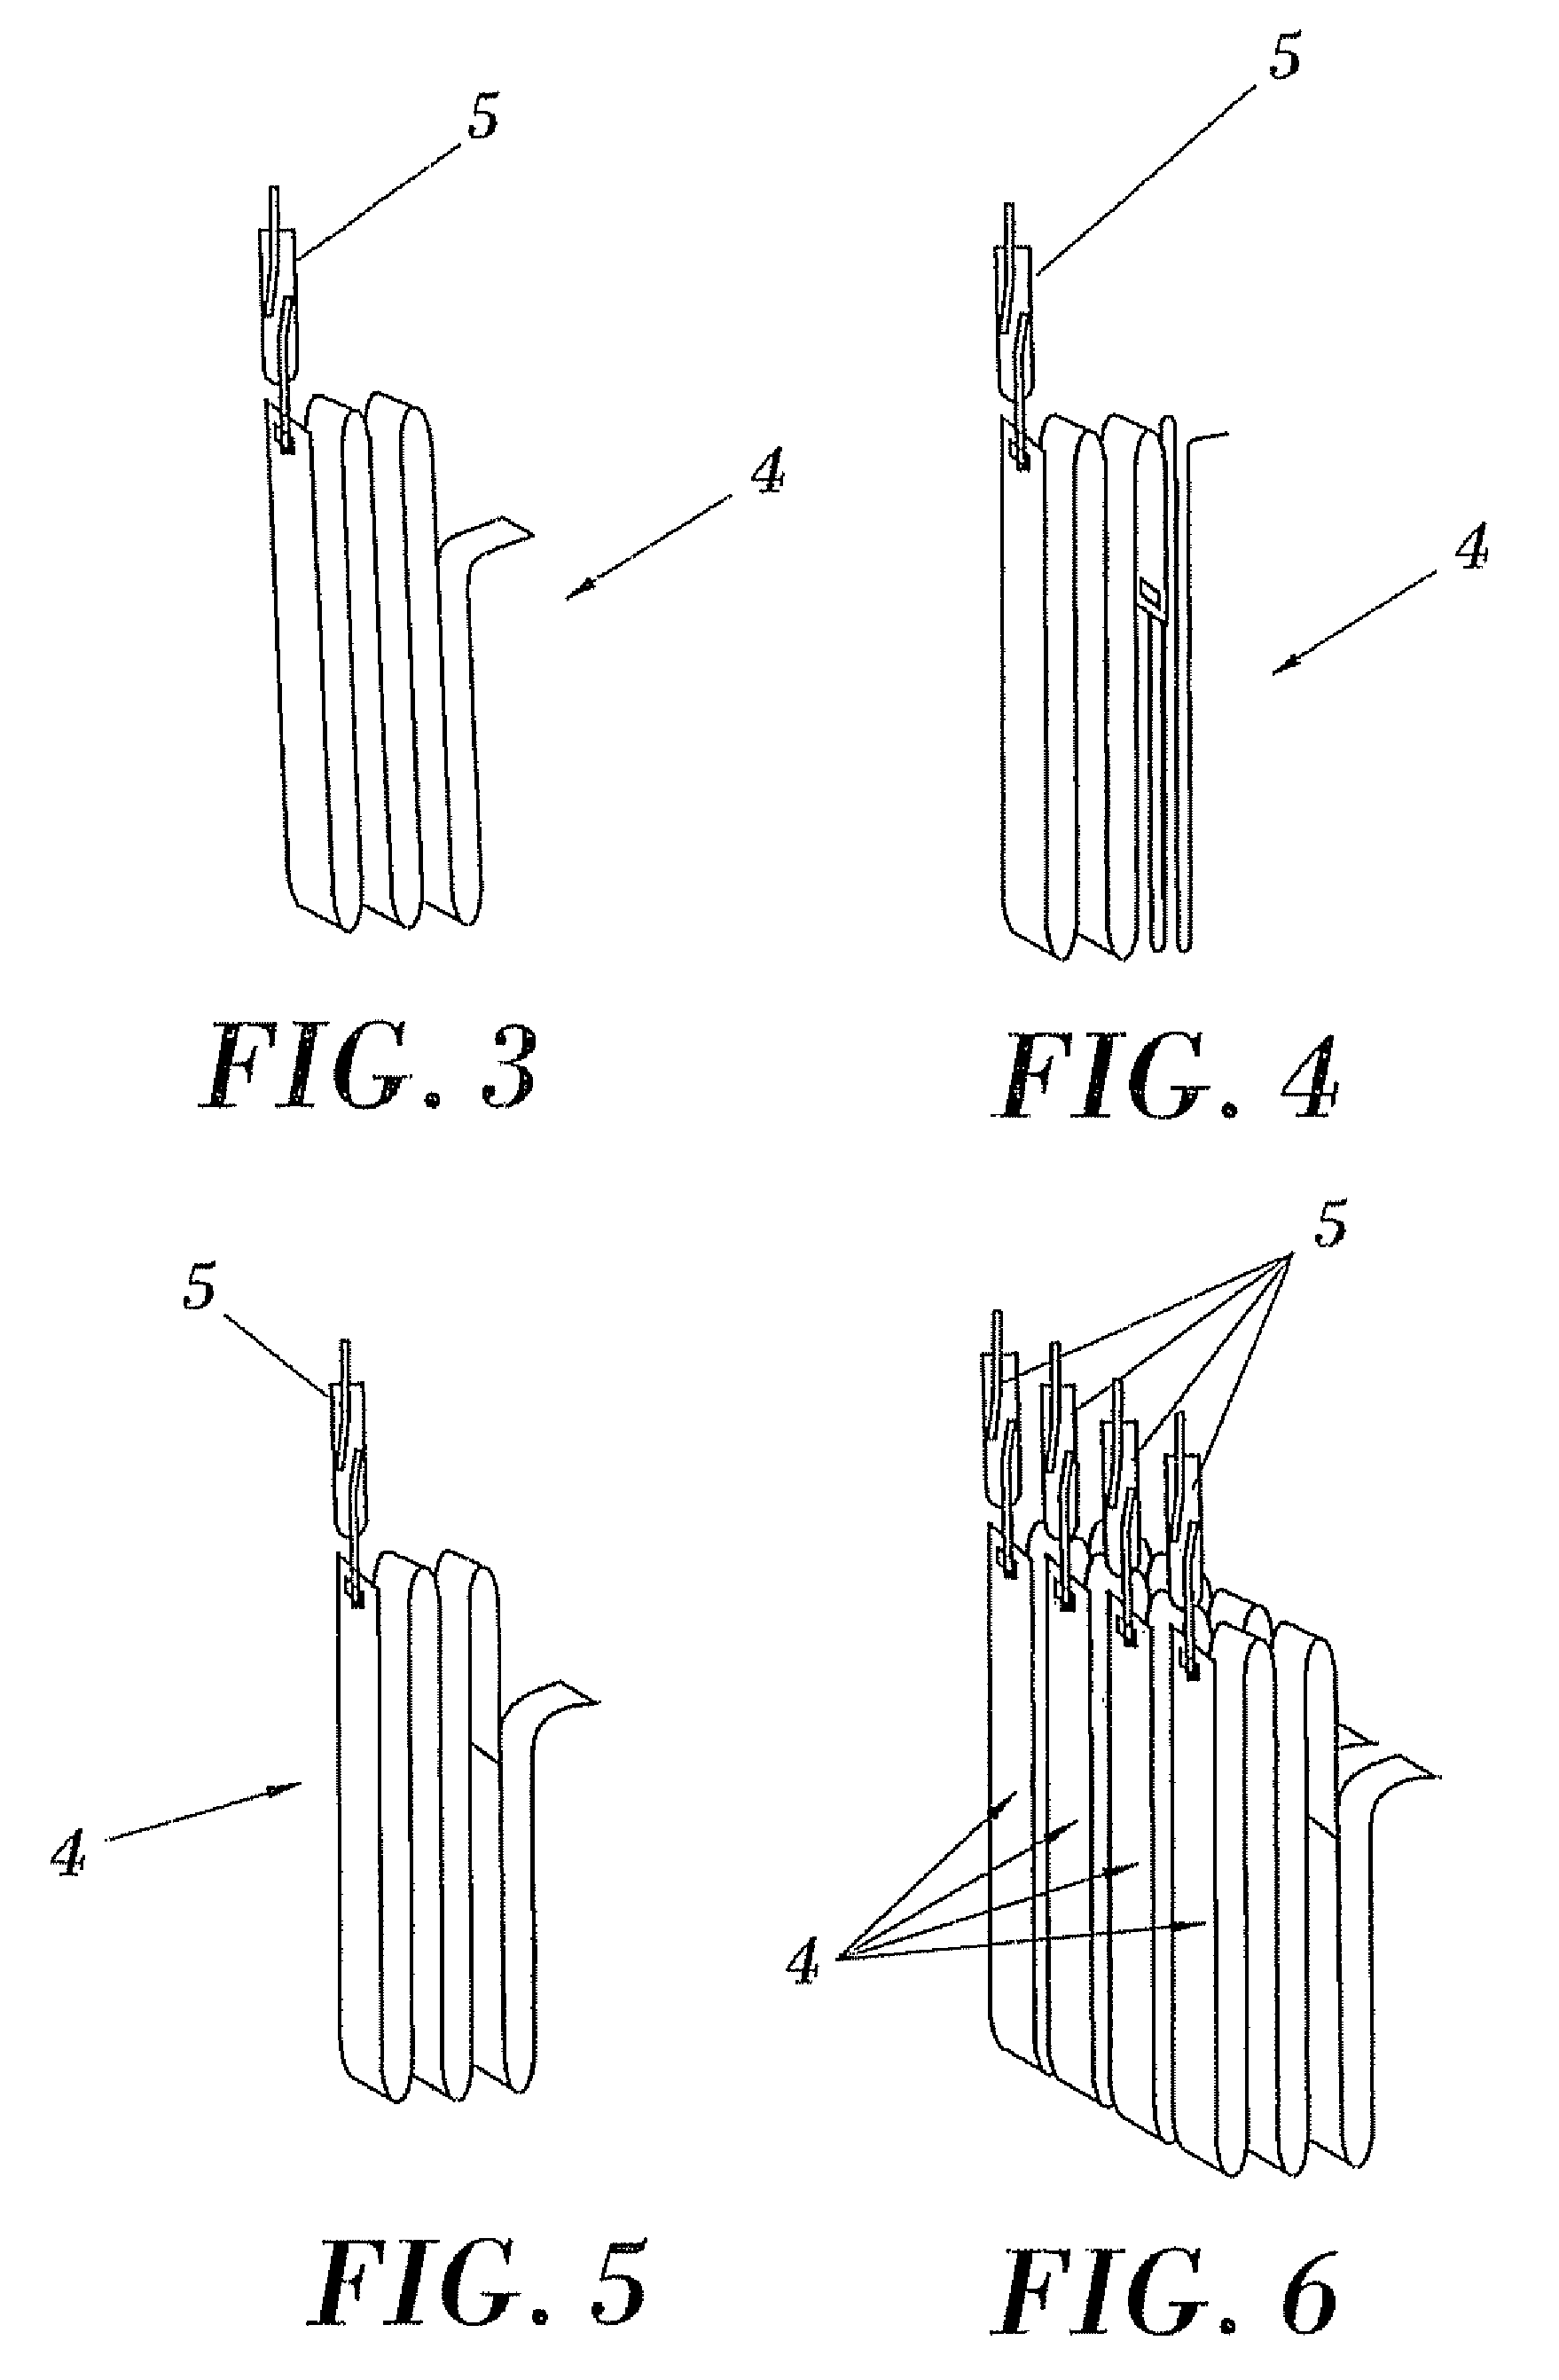 Heater Module for the Admission Gases of an Automobile Engine with an Overheating Protection and/or Closed-Loop Regulation